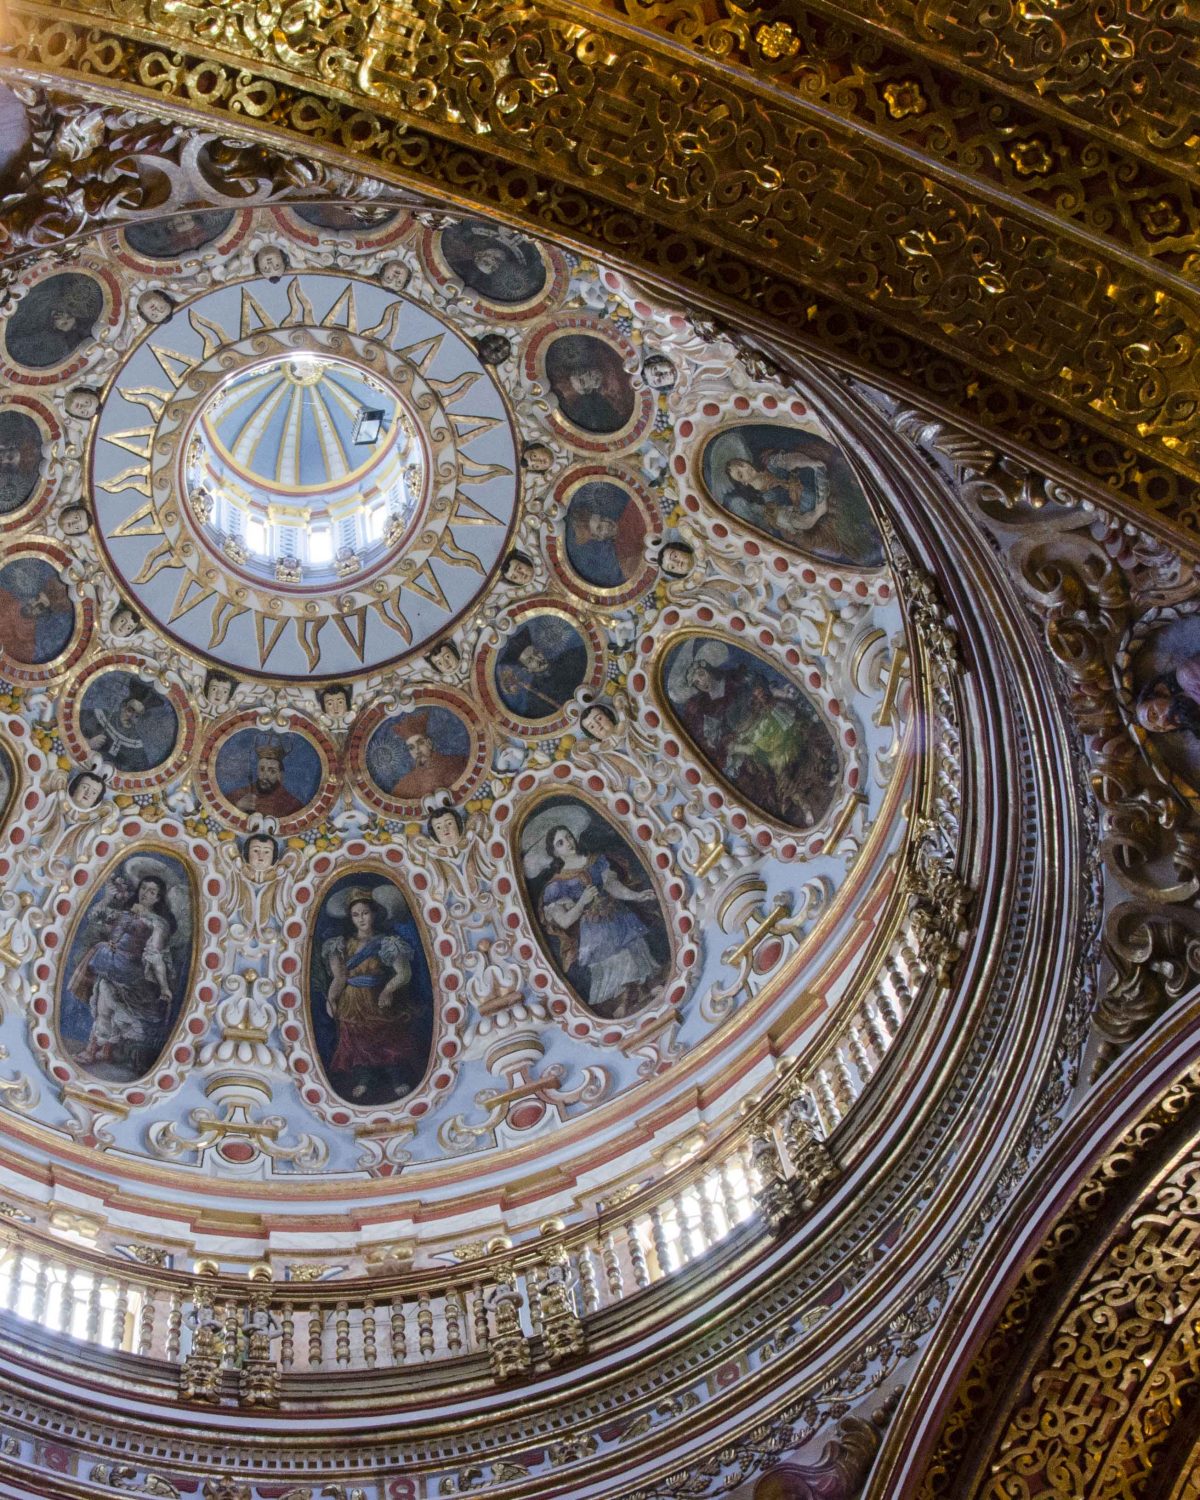 Looking up at the central dome in tones of light blue, dark portraits, and gold trim